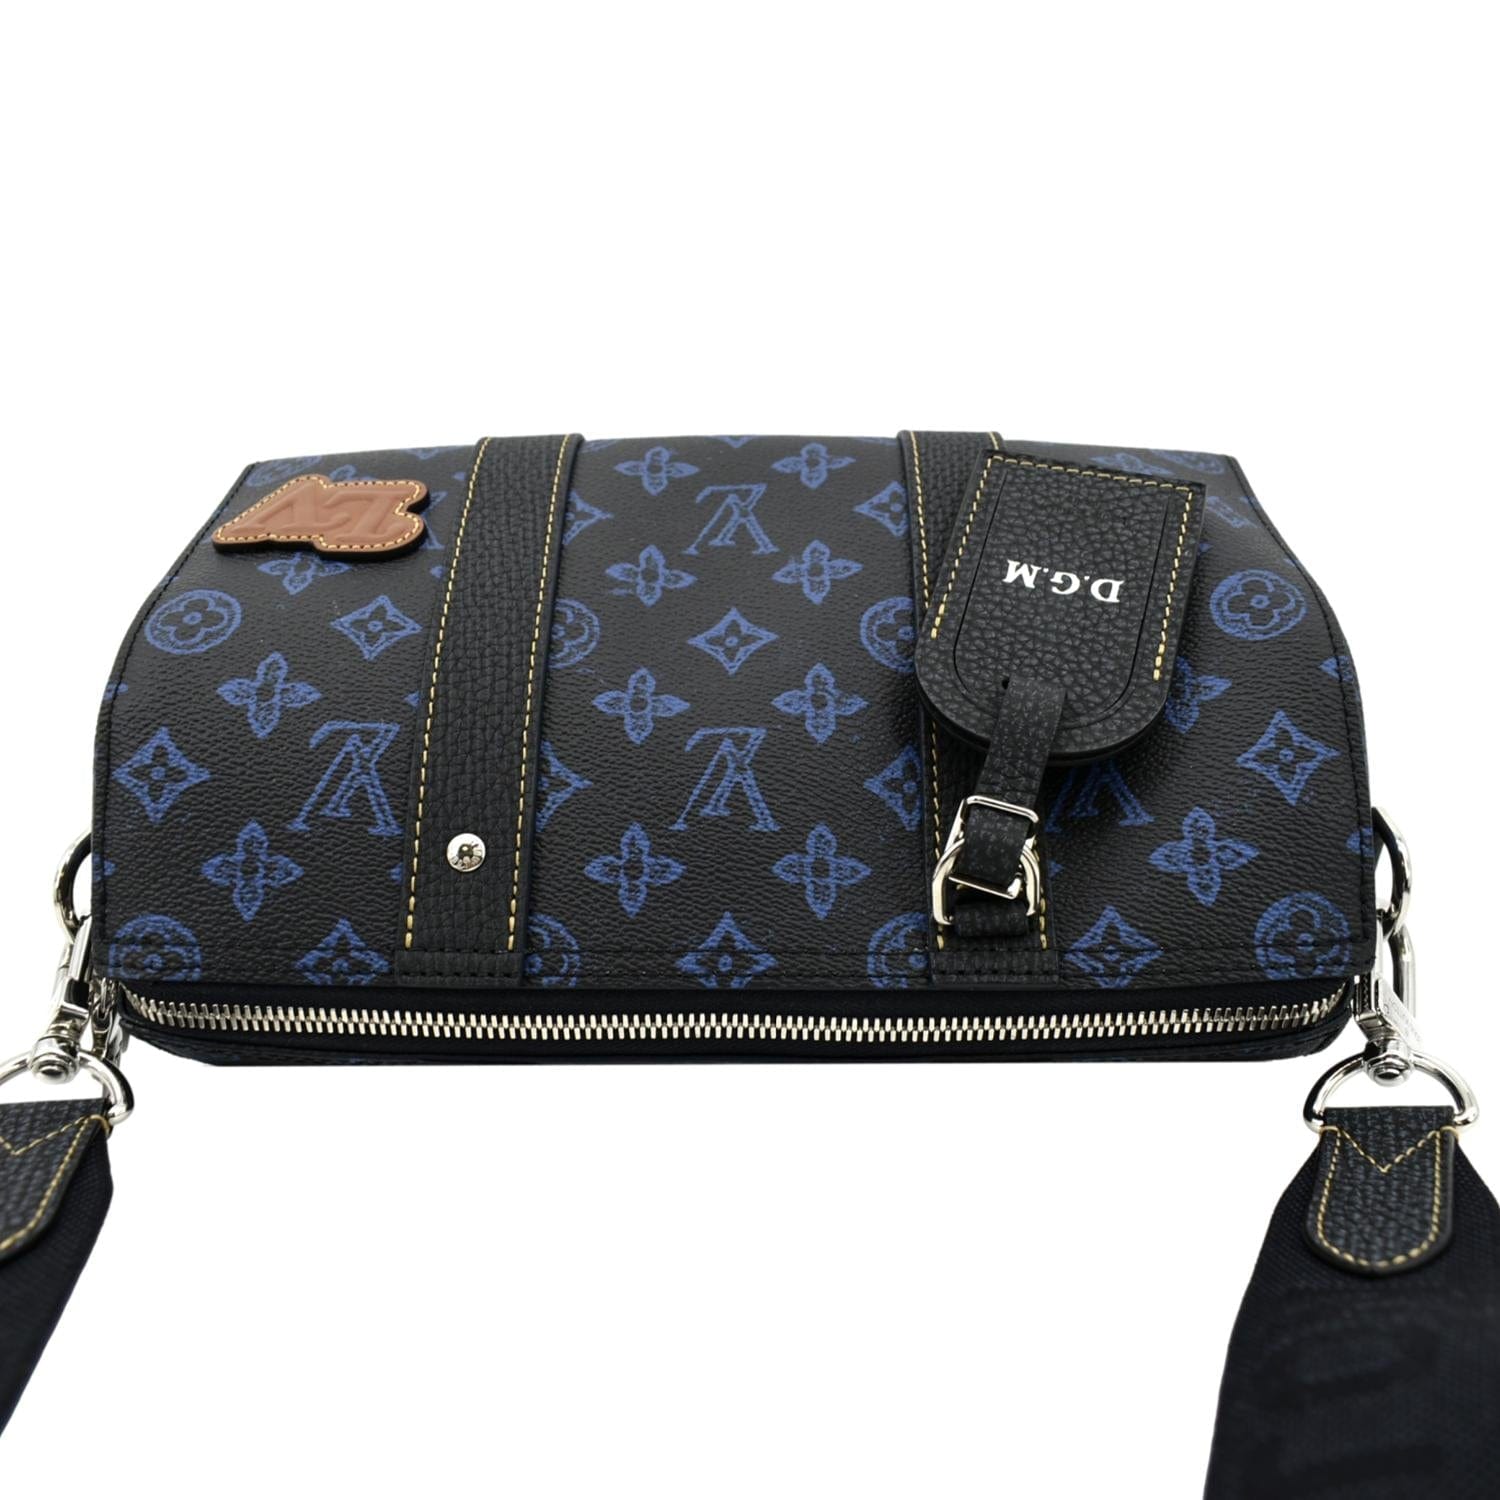 Best Way to Sell a Backpack? : r/Louisvuitton